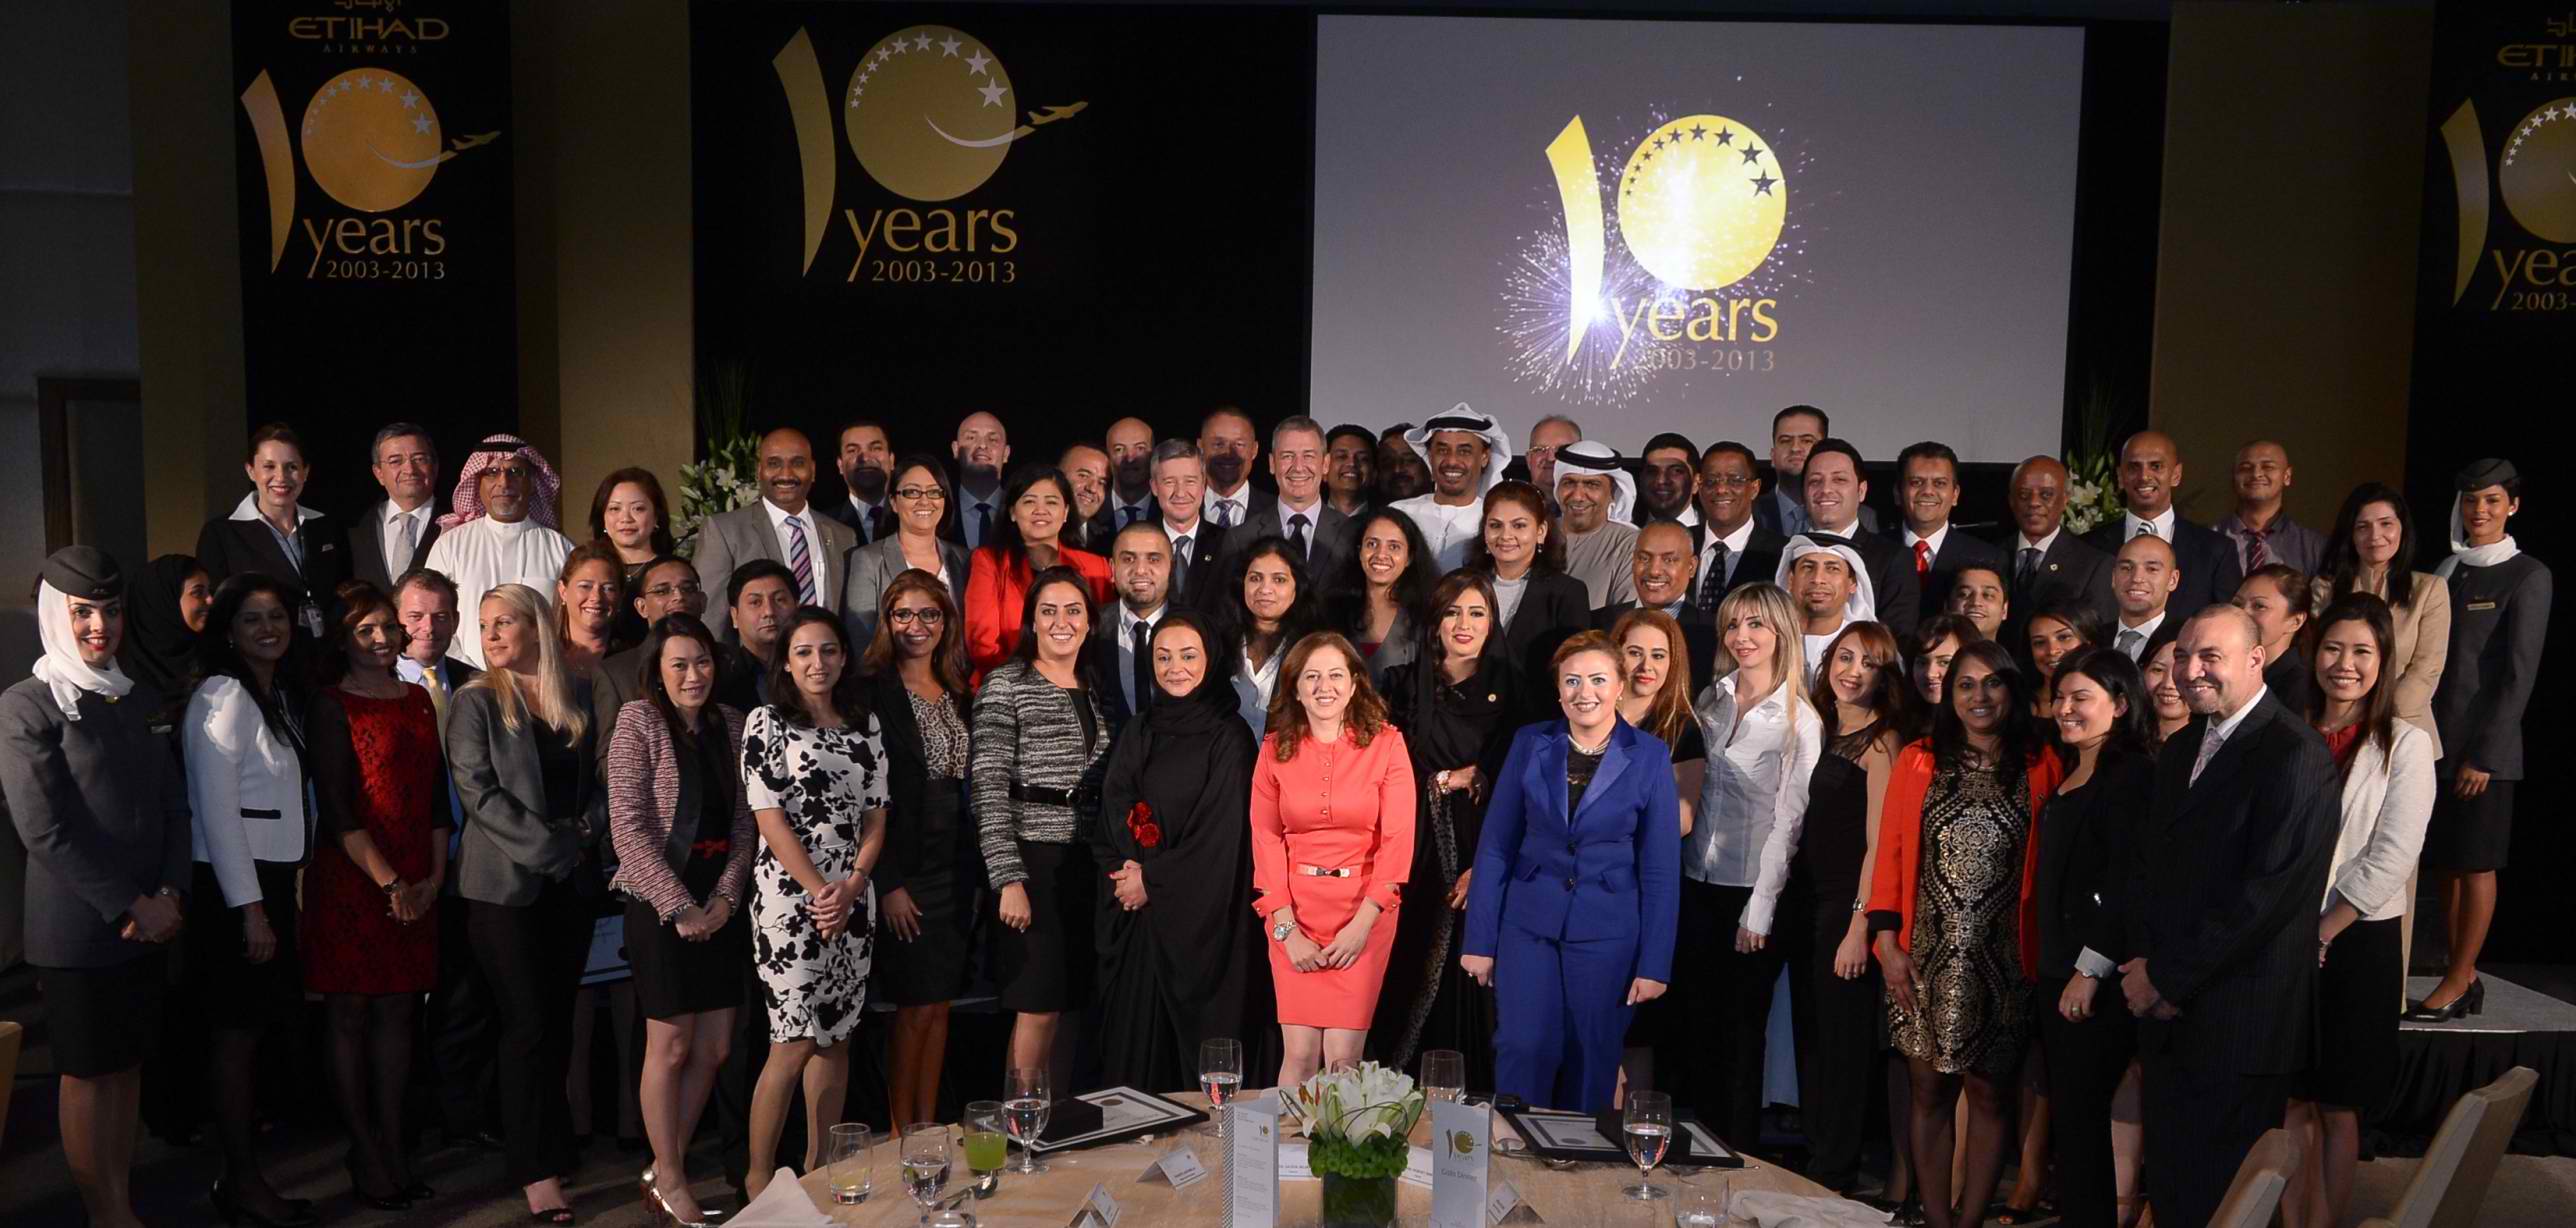 Etihad Airways longest serving staff members celebrate their ten-year achievements with airline management executives. 